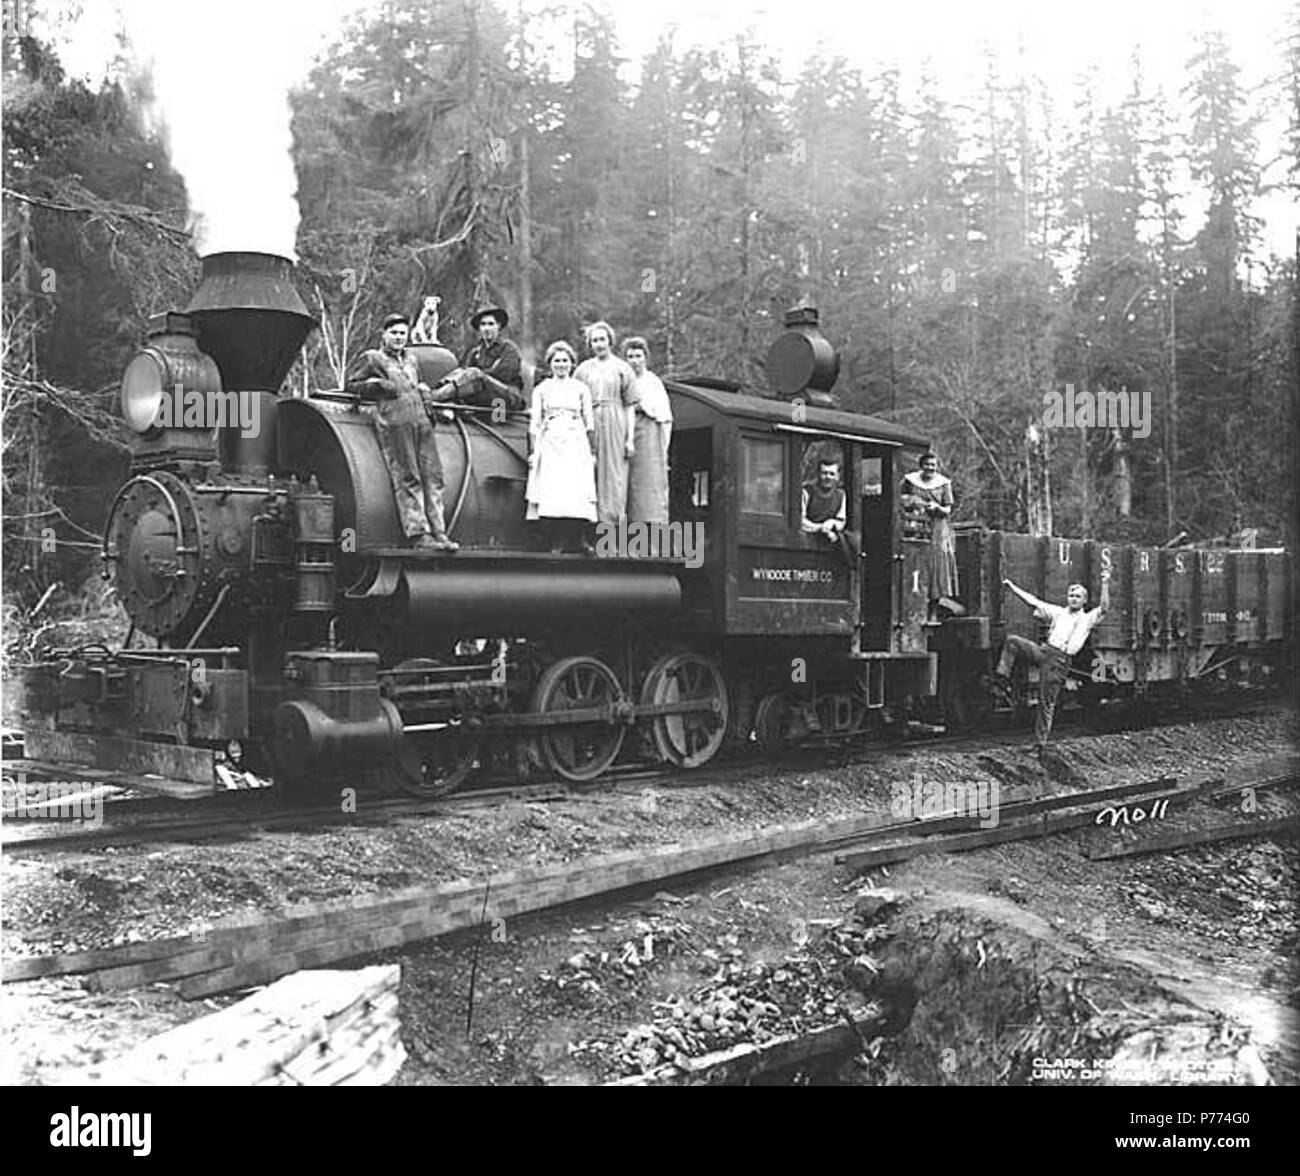 English: Men, women and dog with Wynooche Timber Company 0-6-4